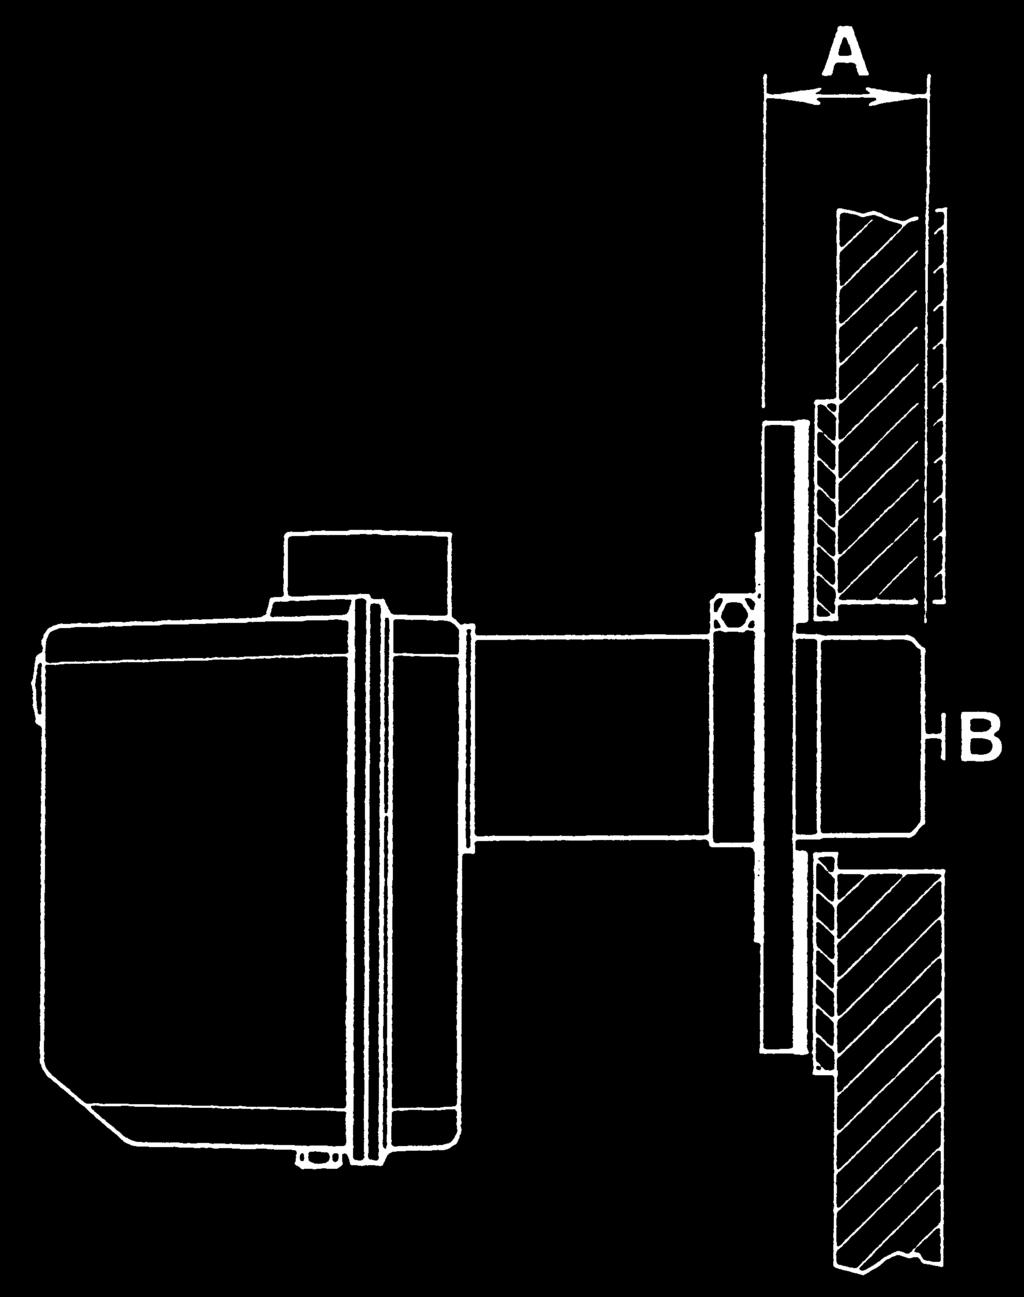 METHOD 1 UNIVERSAL MOUNTING FLANGE A) Slide the UNIVERSAL MOUNTING FLANGE (1) over the end cone assembly with the flat flange surface towards the heating unit.